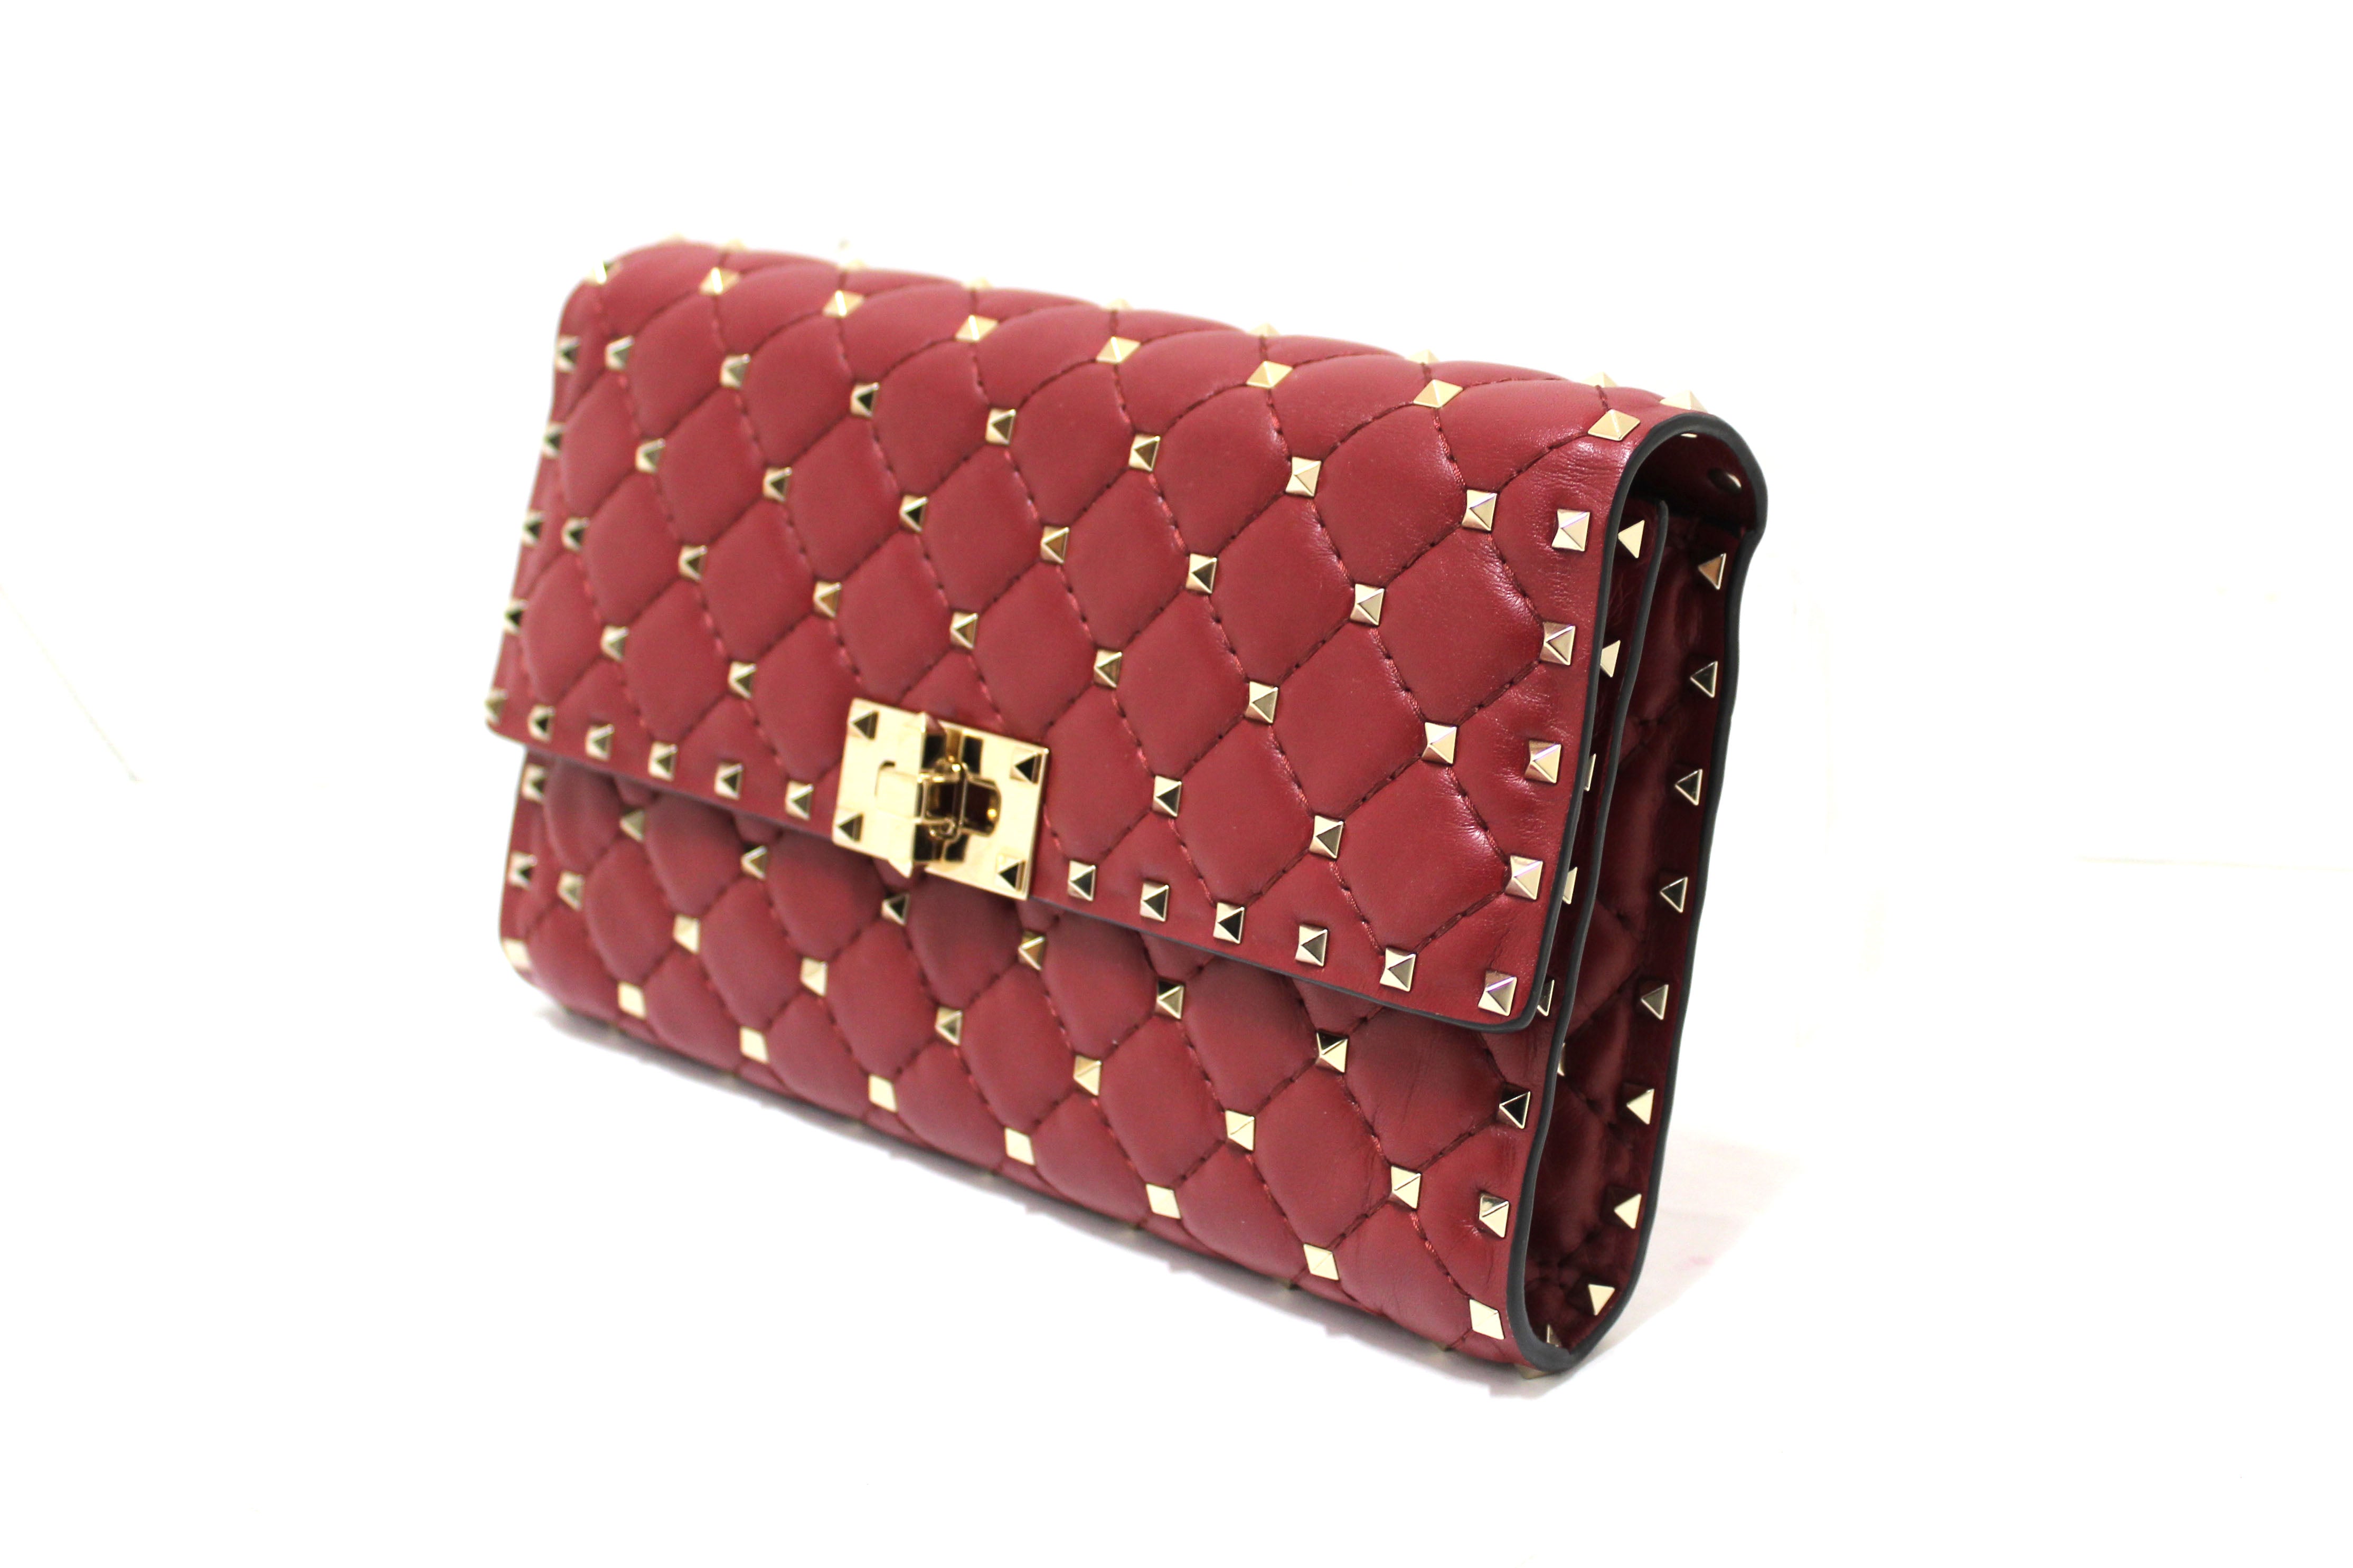 Authentic Valentino Garavani Red Quilted Nappa Leather Rockstud Spike Crossbody Clutch Bag